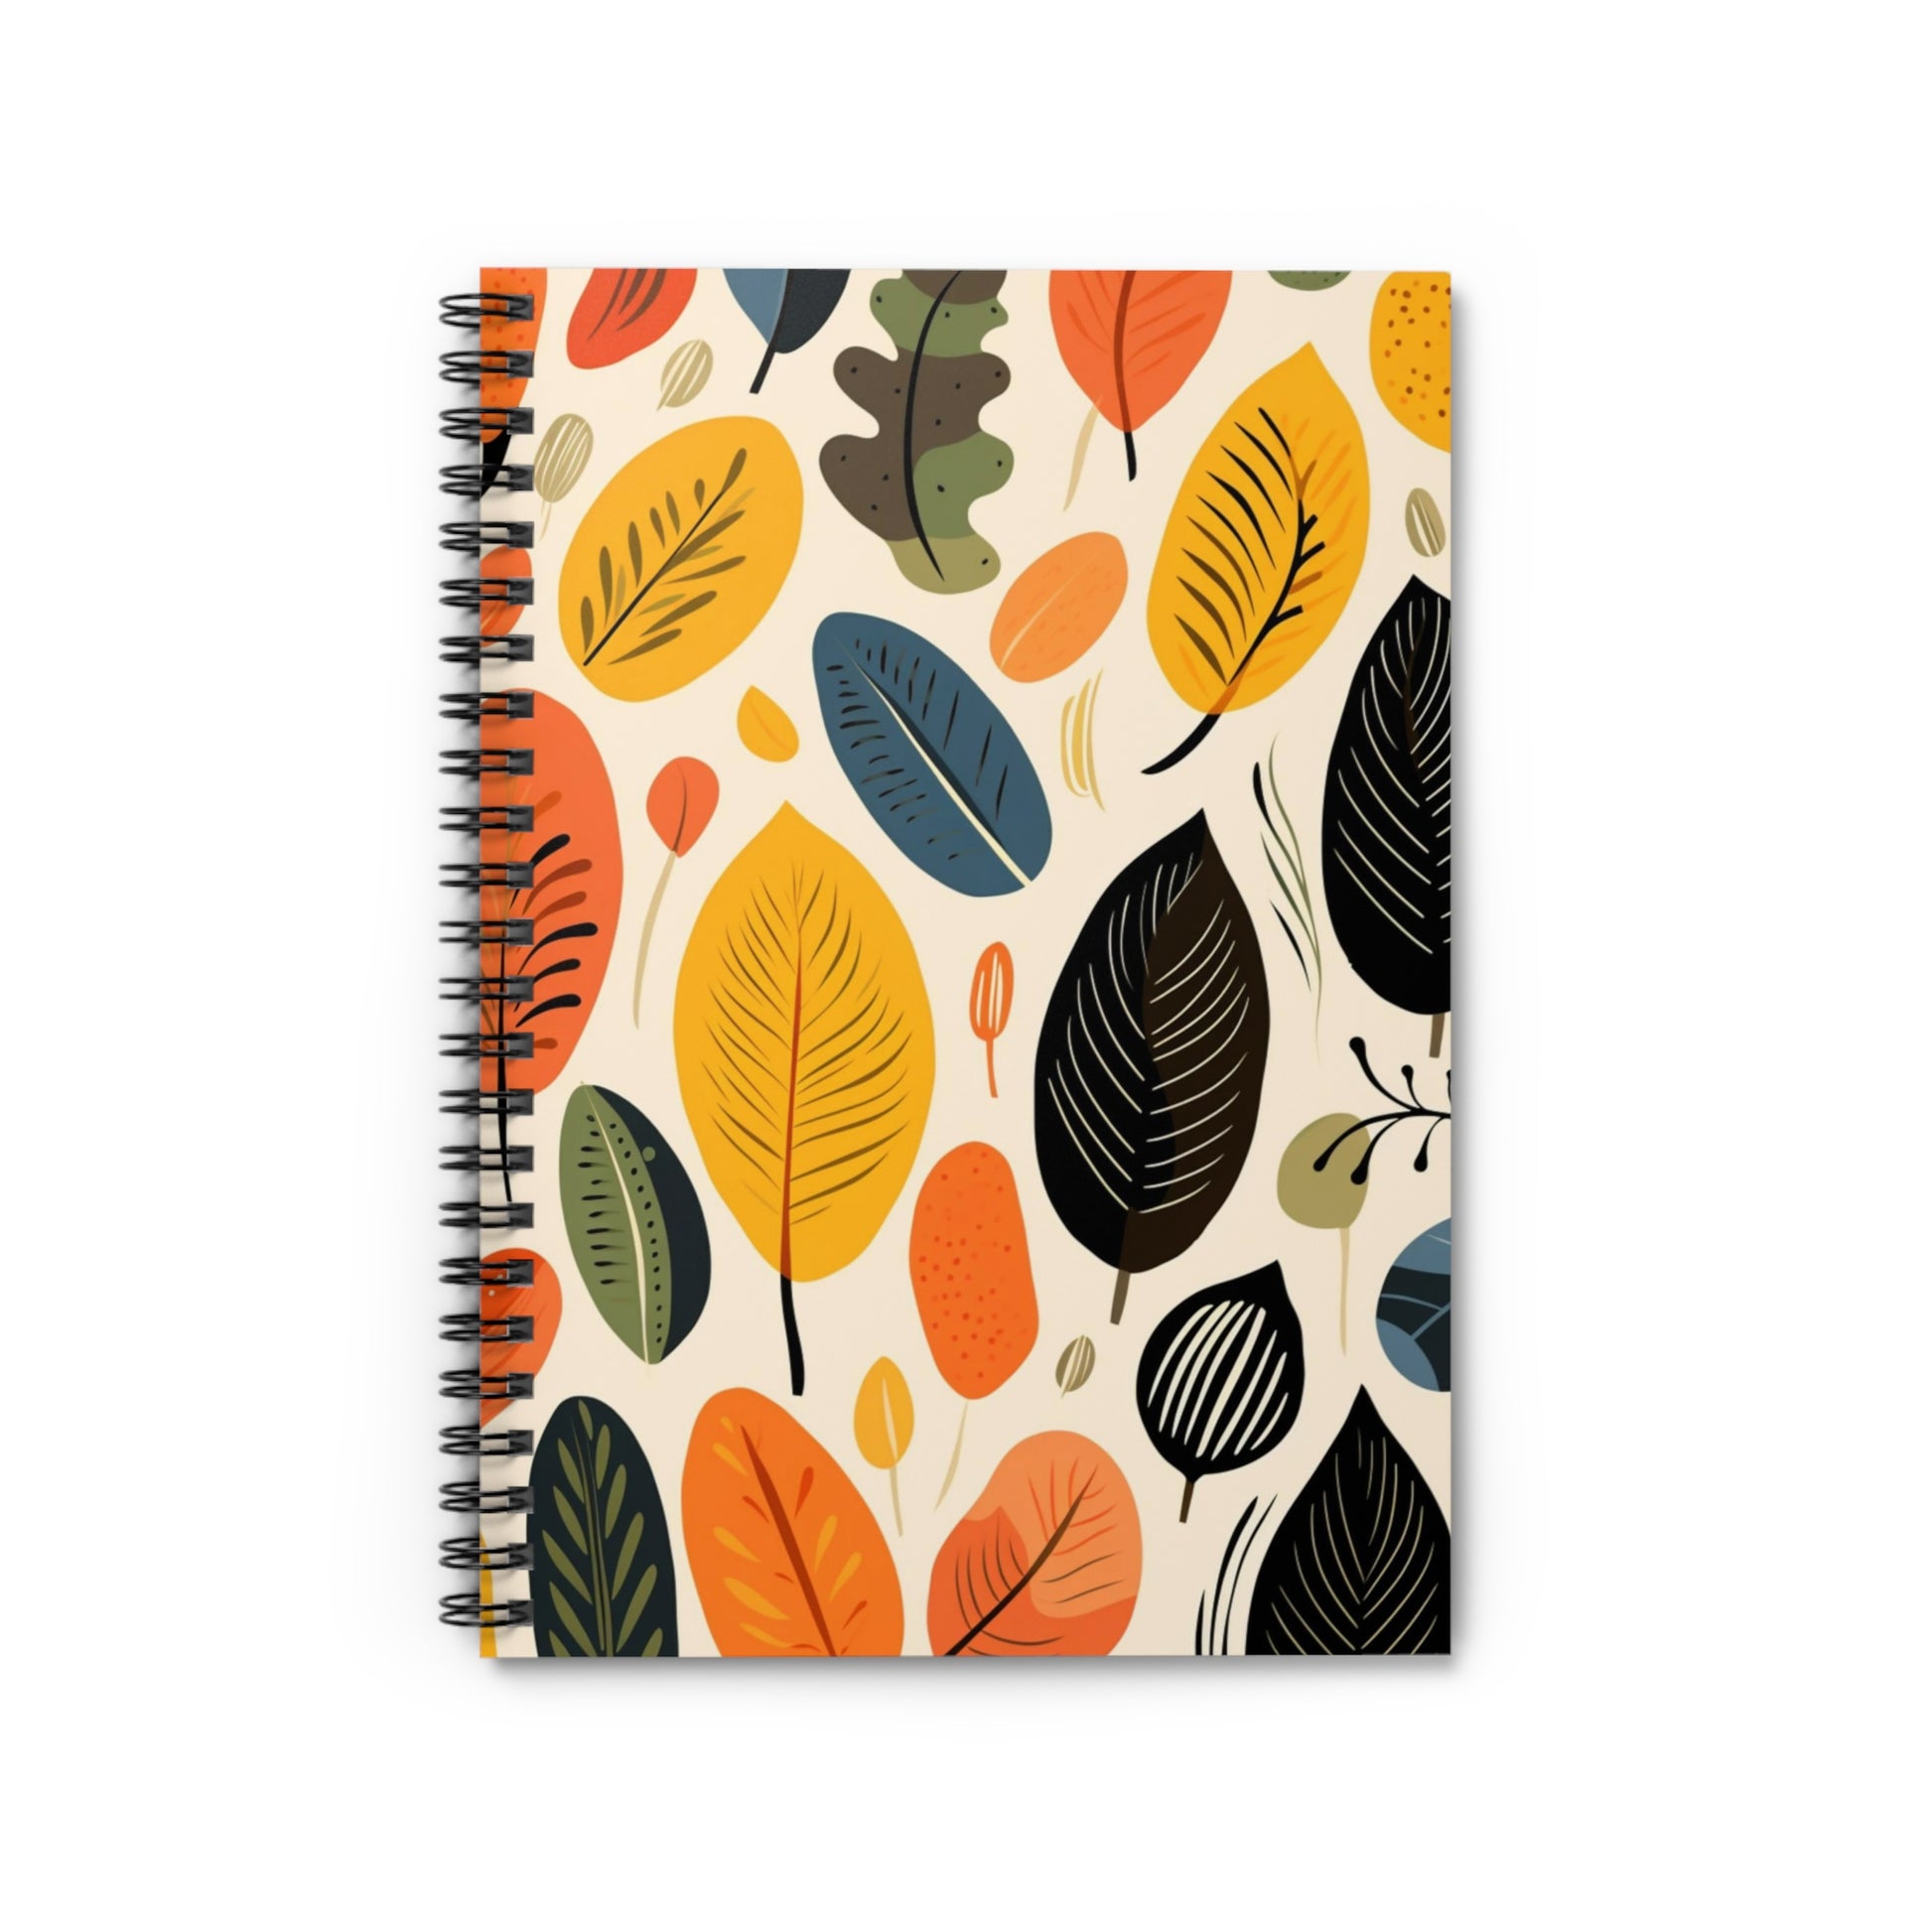 Boho Leaves Spiral Bound Notebook, Earthy Travel Pattern Design Small Journal Notepad Ruled Line Book Paper Pad Work Aesthetic Starcove Fashion